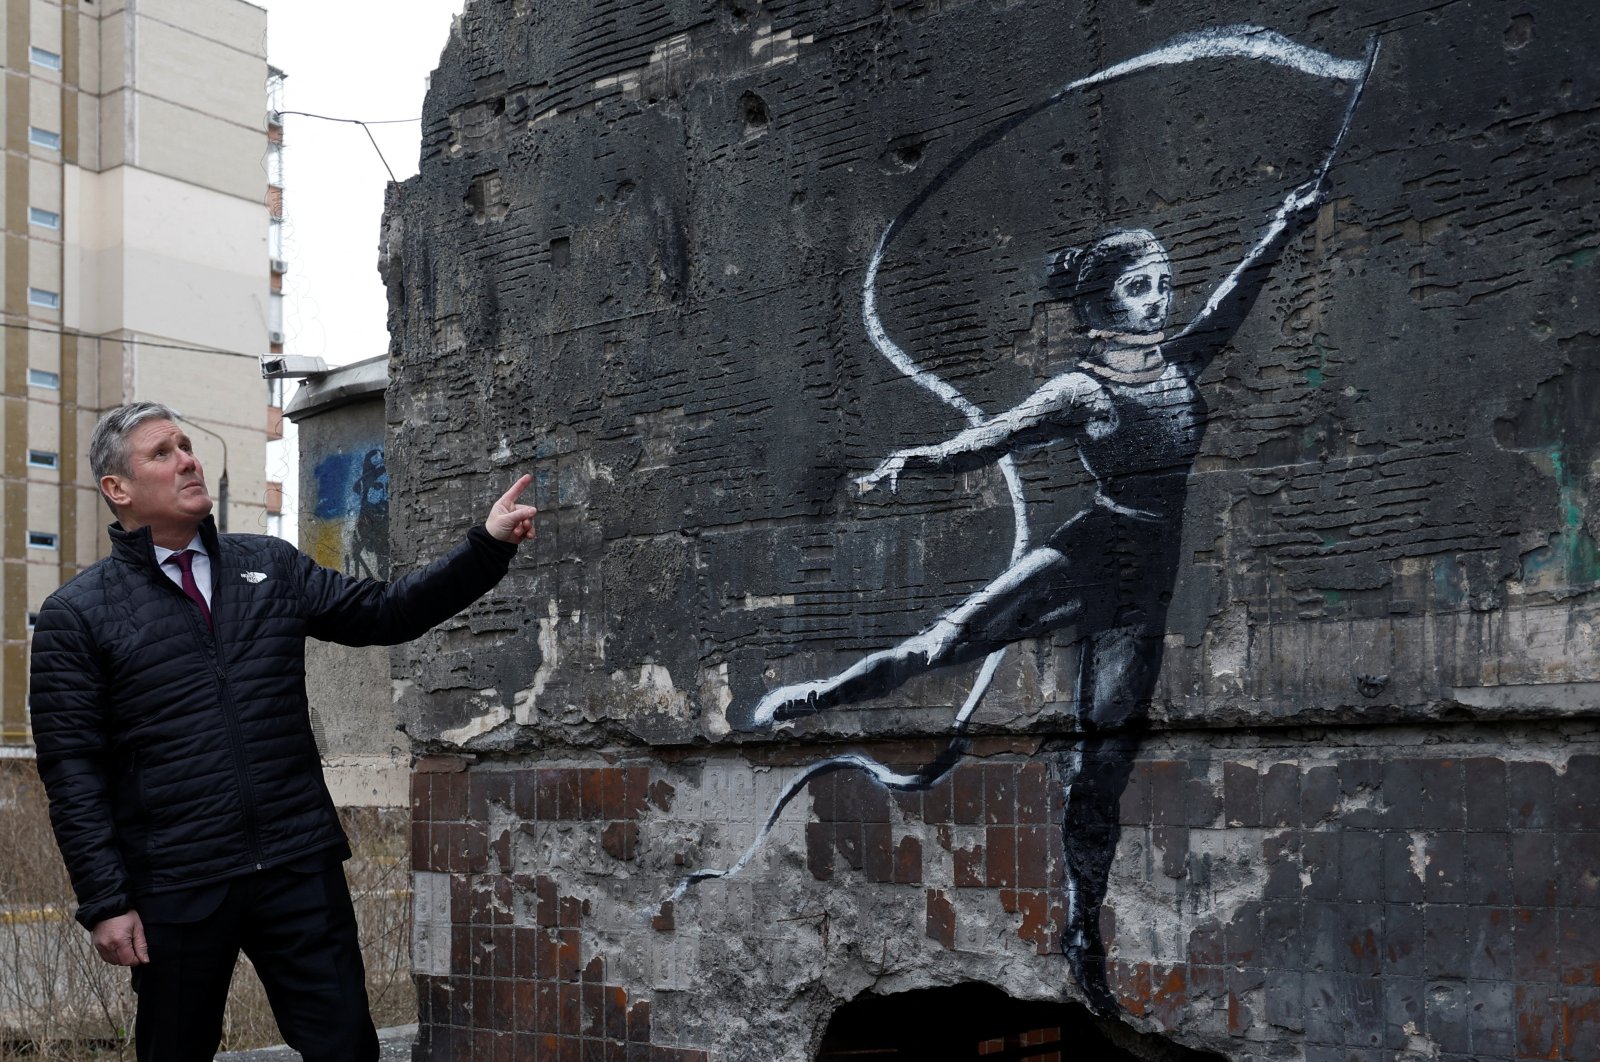 British Labour Party leader Keir Starmer next to a heavily damaged residential building with the work of world-renowned graffiti artist Banksy in the town of Irpin, Ukraine, Feb. 16, 2023. (Reuters Photo)